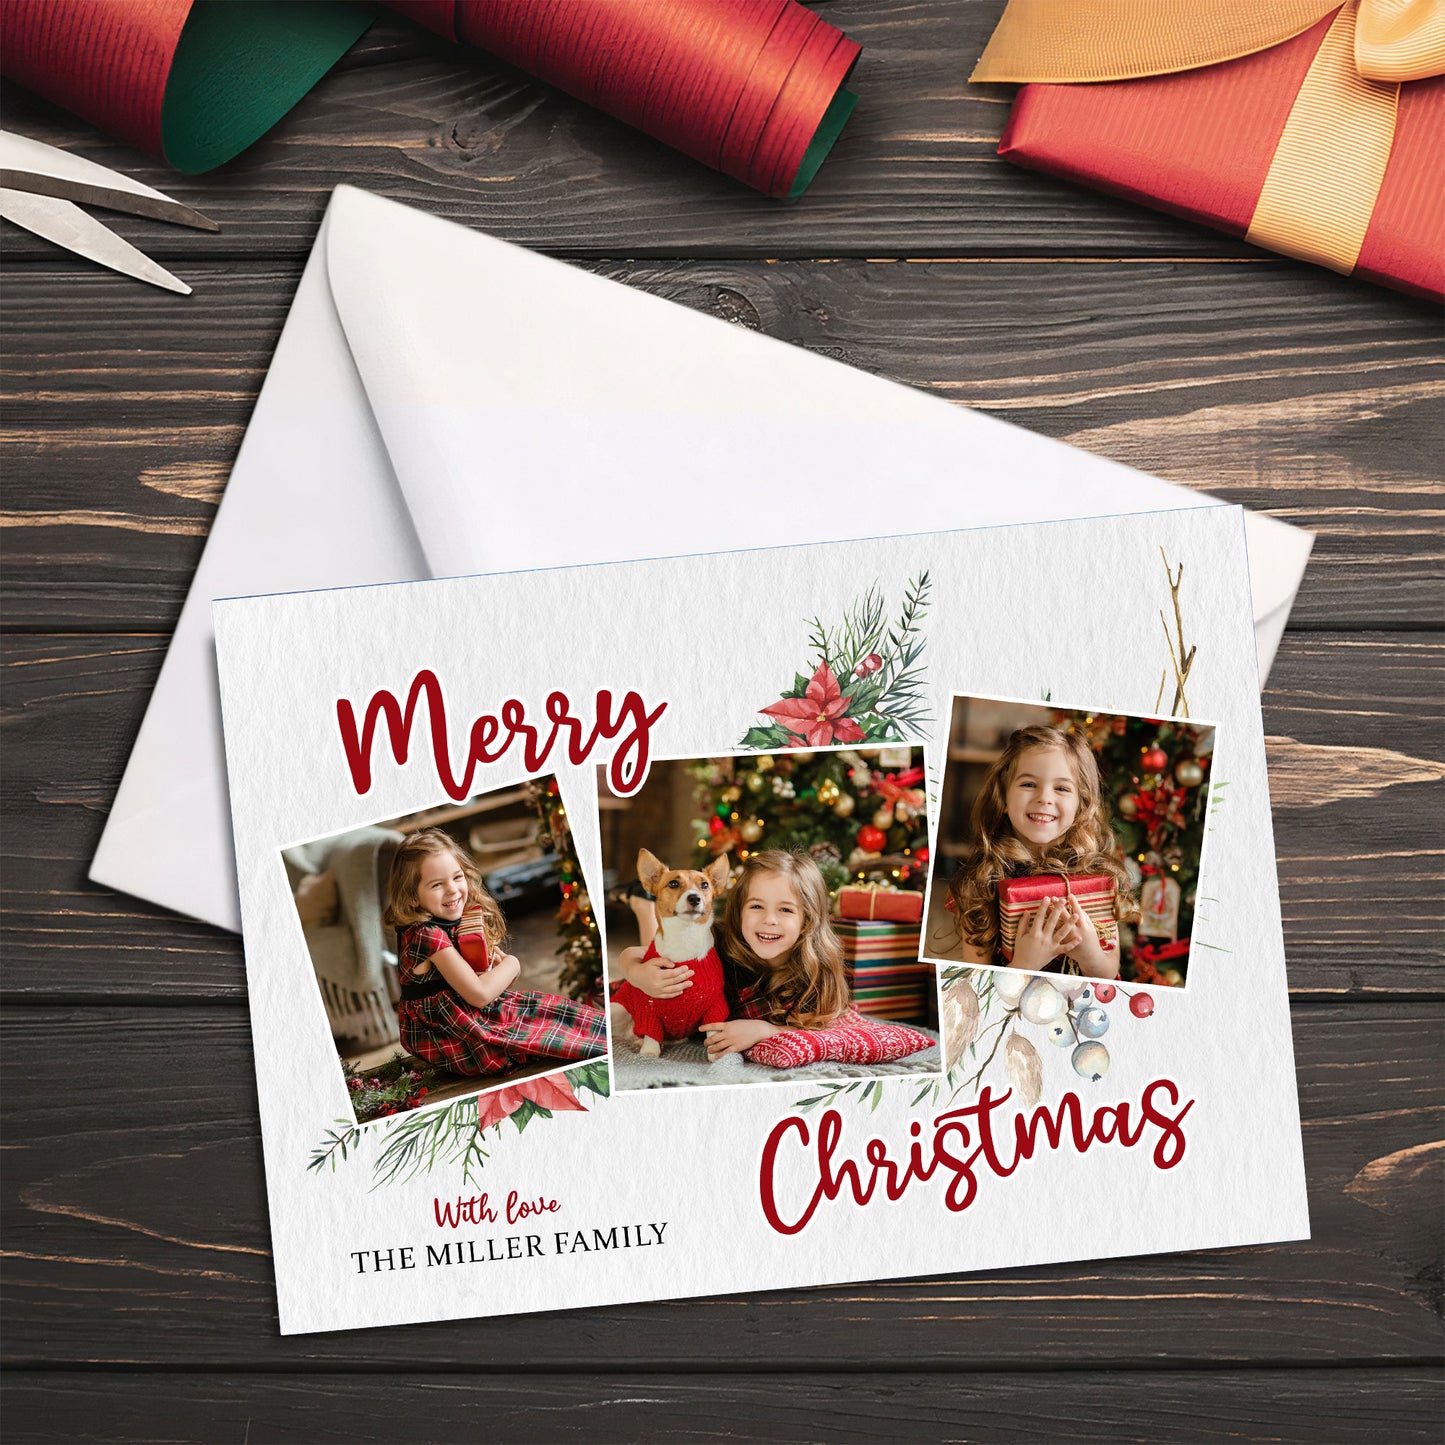 Merry Christmas - Personalized Photo Christmas Card